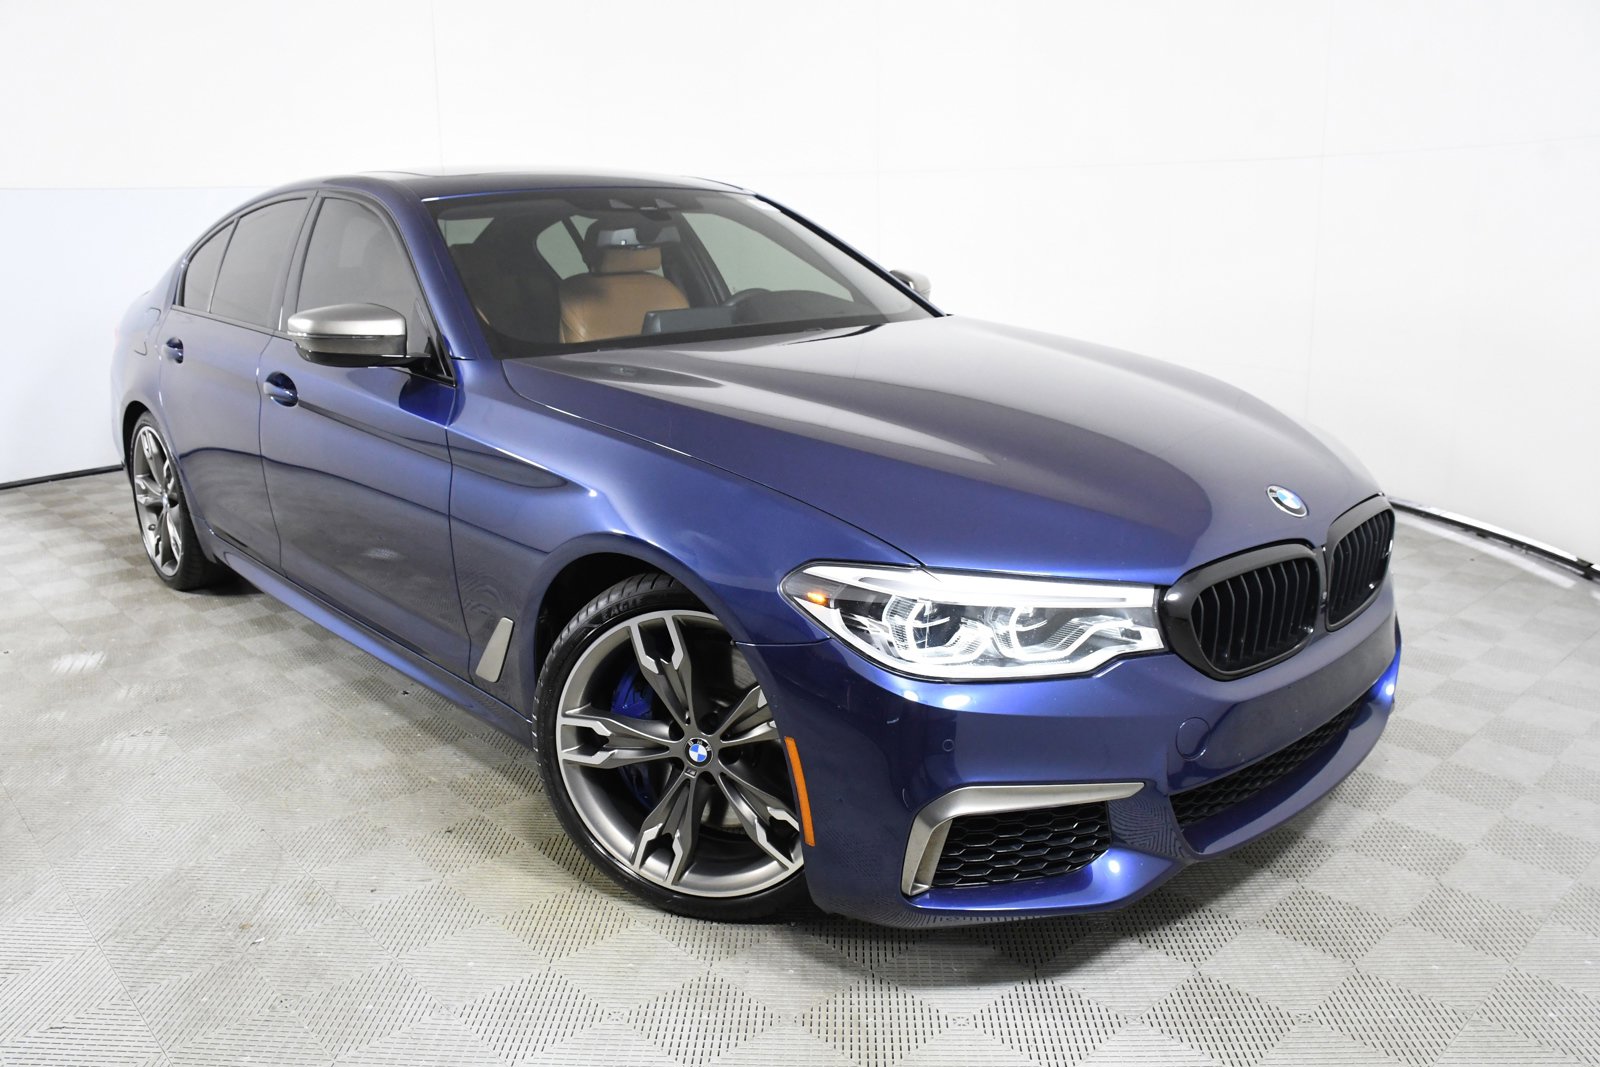 Pre-Owned 2020 BMW 5 Series M550i xDrive 4dr Car in Palmetto Bay #CD00373 |  HGreg Nissan Kendall